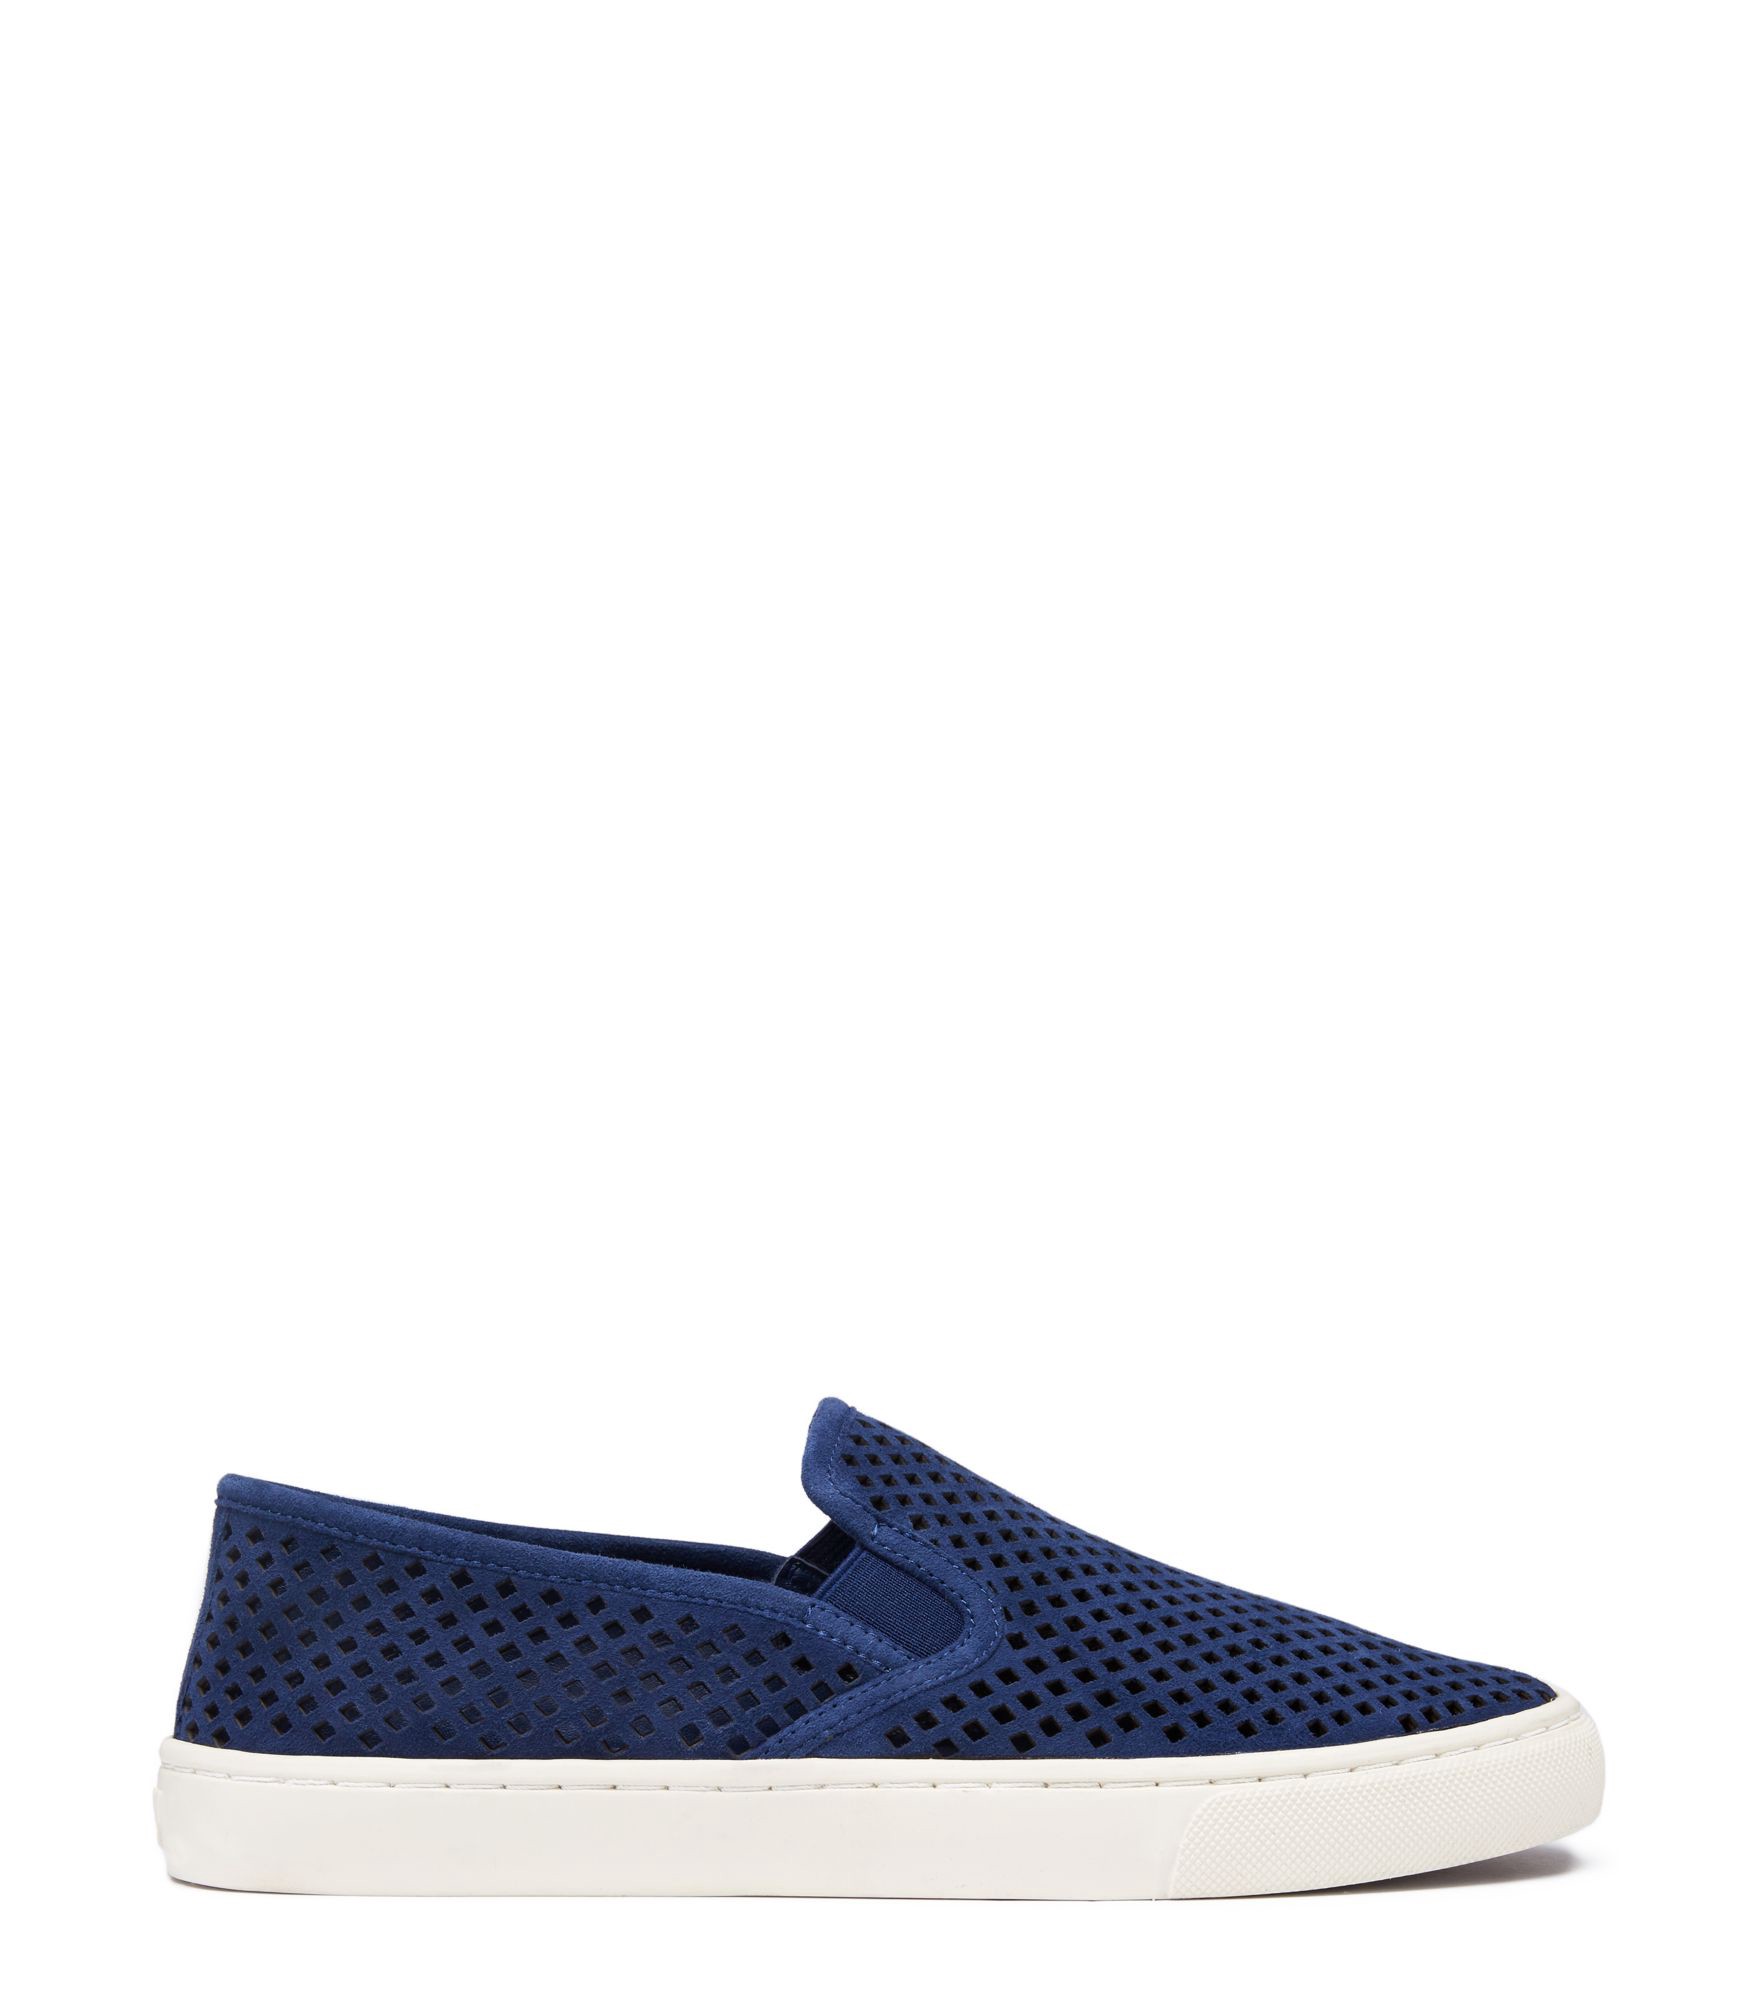 Tory Burch Jesse Perforated Sneaker In 